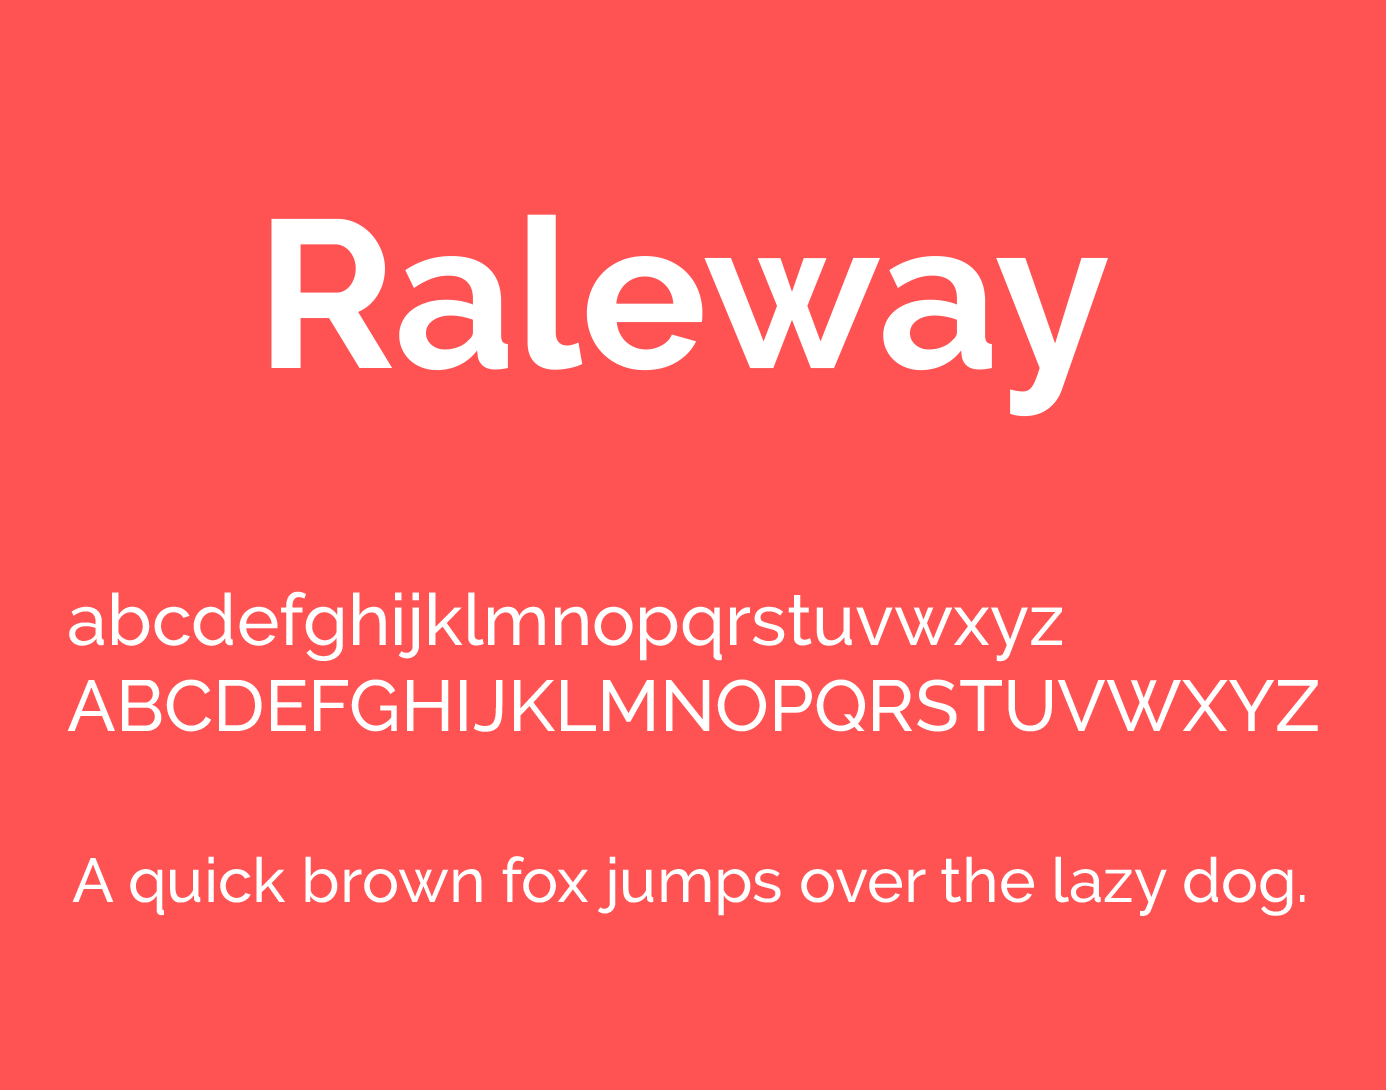 Raleway - best fonts for resumes & CV's